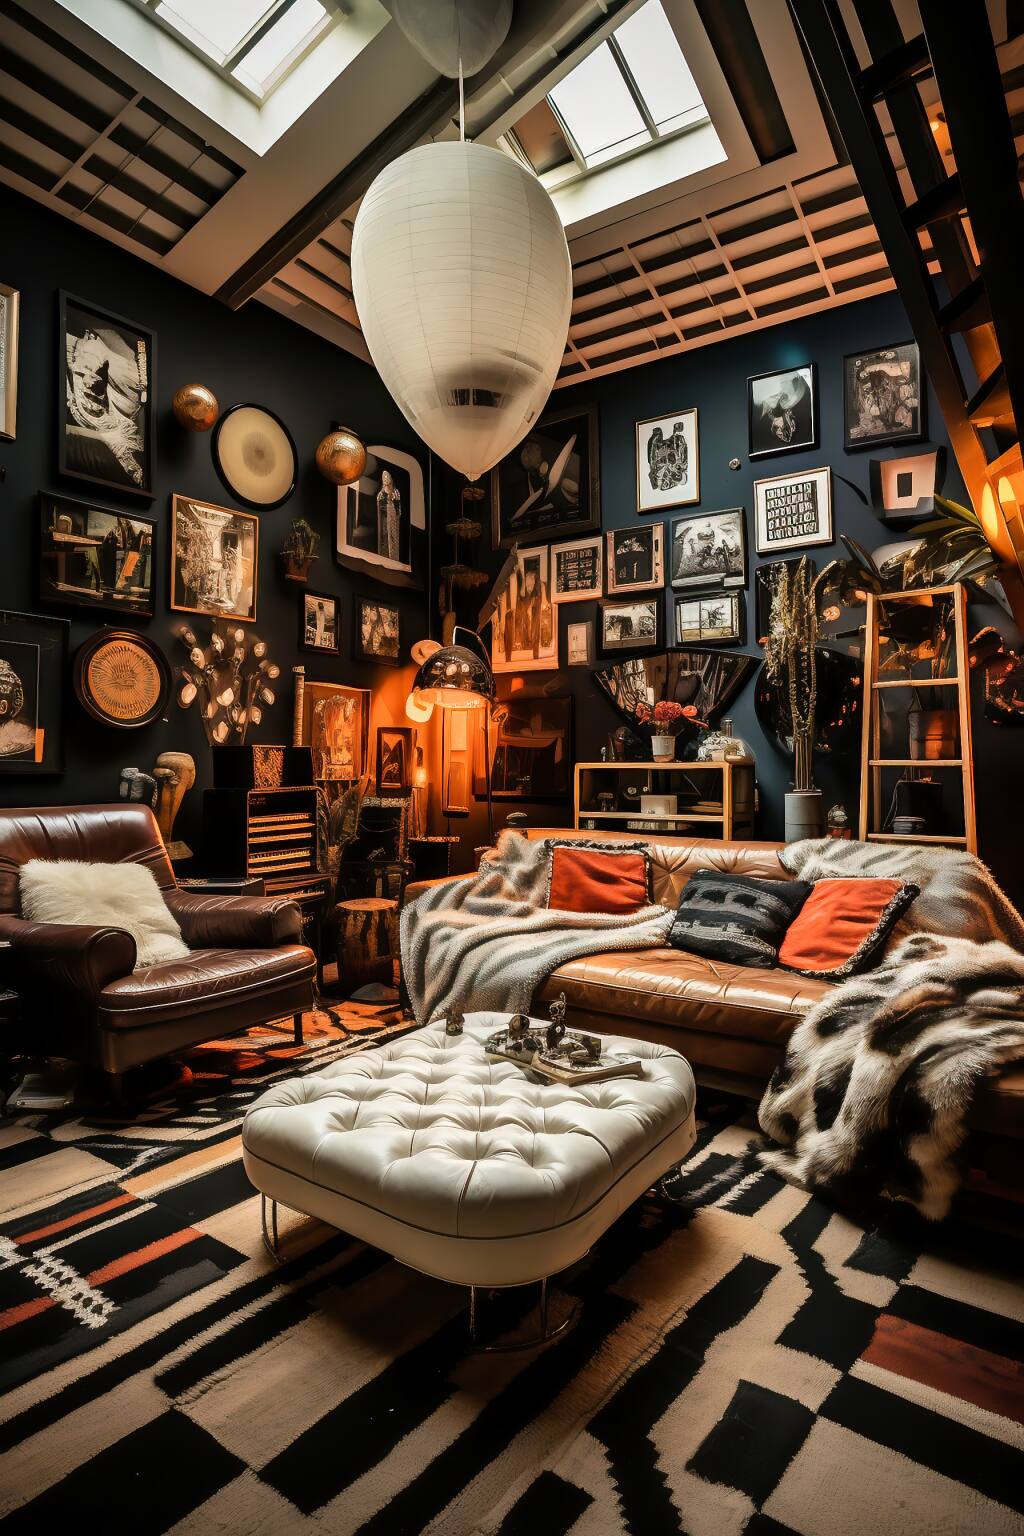 Creative Bohemian Living Room In Black And White, Featuring Leather Armchairs, A Gallery Wall, And Monochrome Rugs.